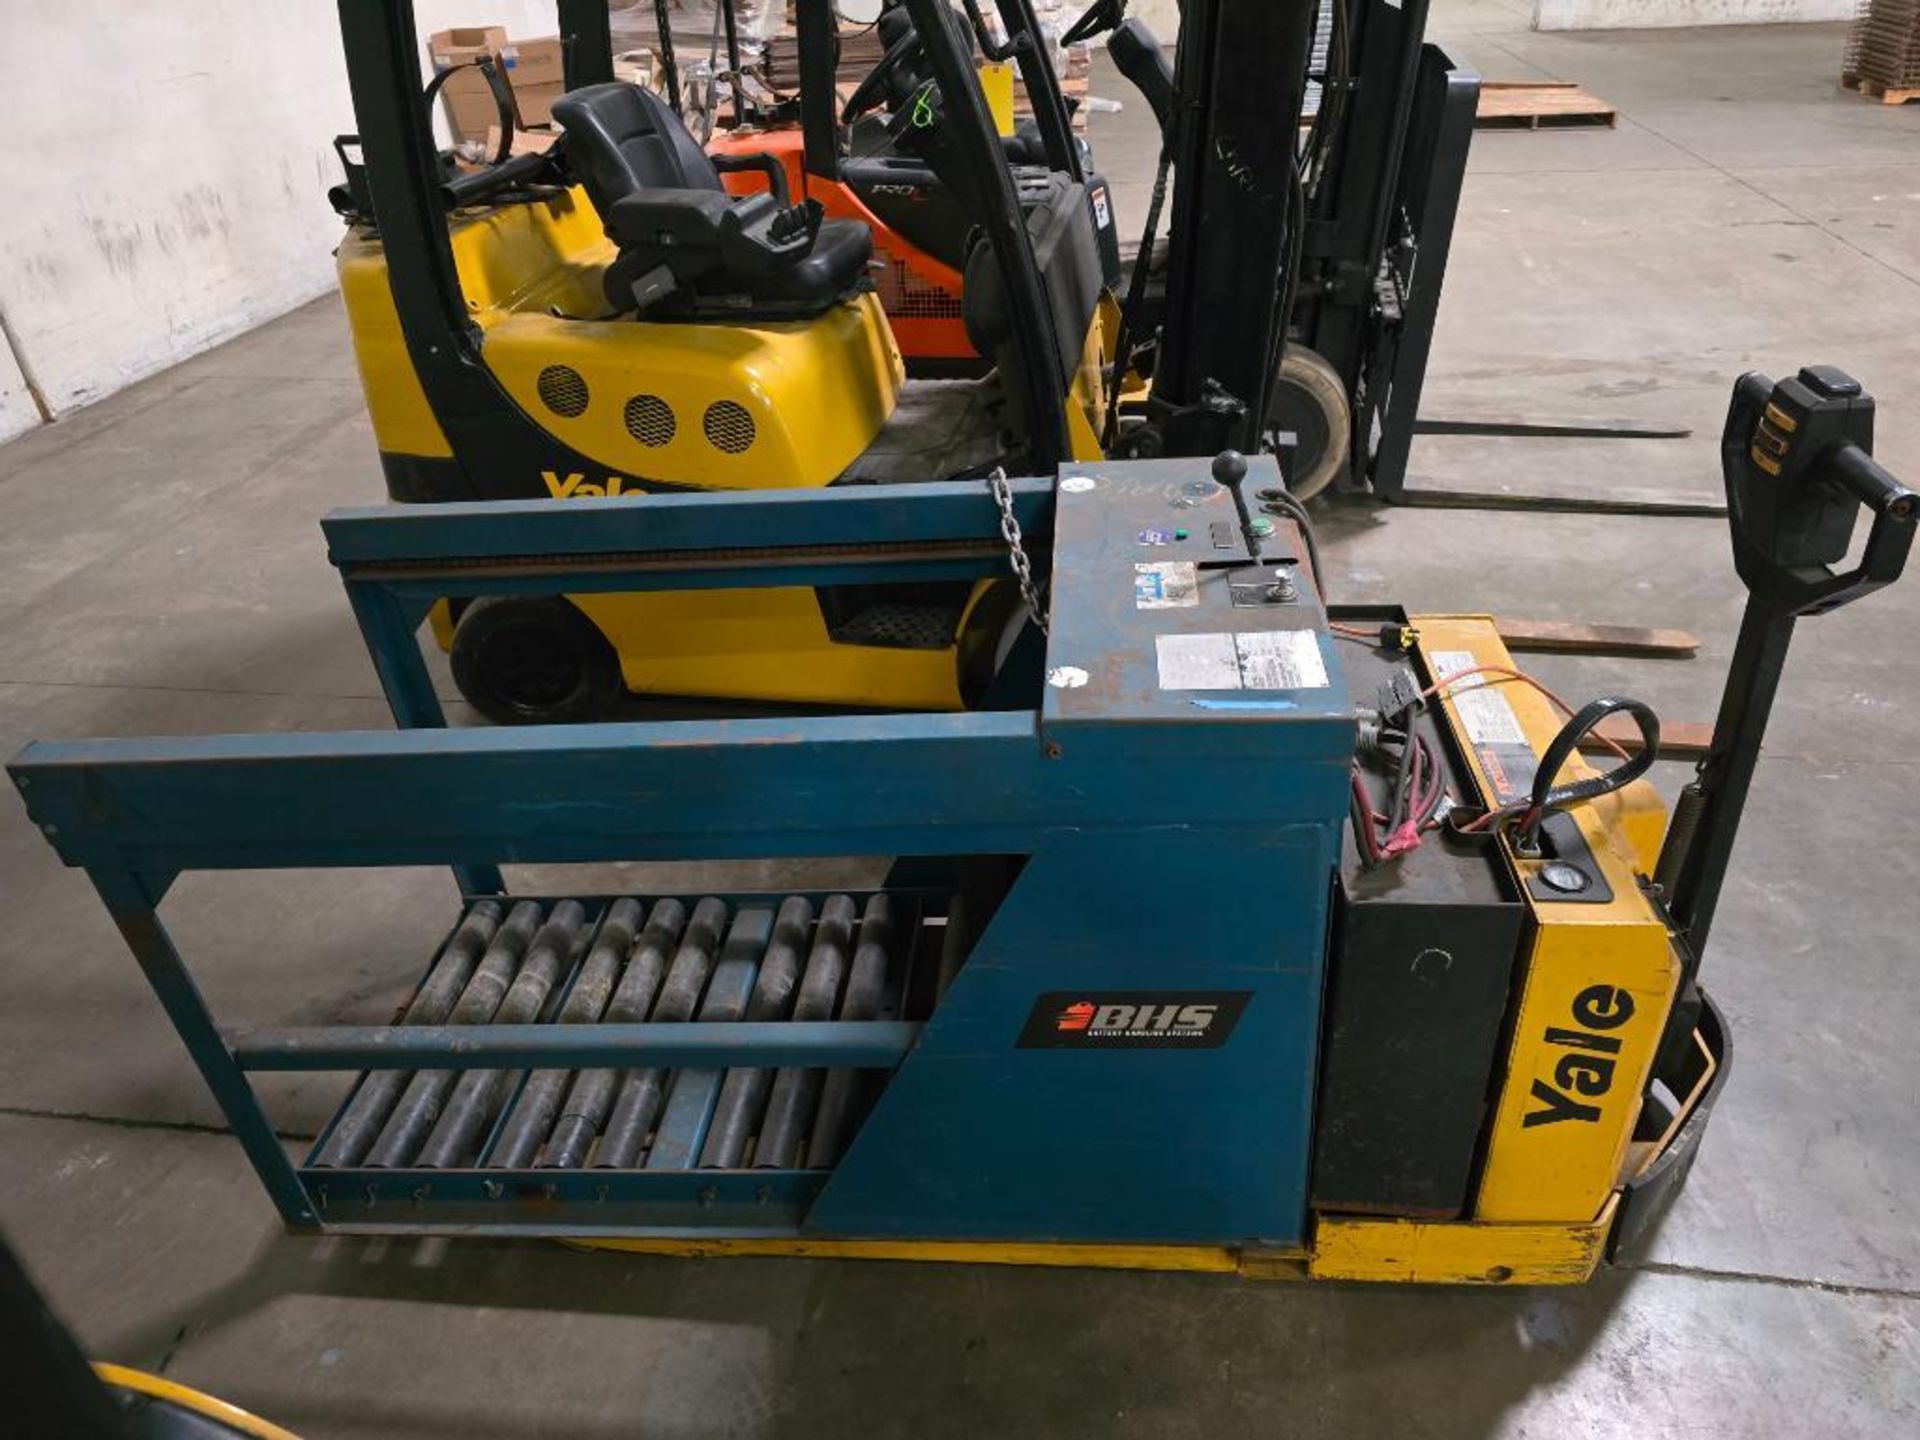 BHS 4,000 LB. Battery Electric Changer, Model ATC-25MG, on Yale 4,000 Lb. Electric Pallet Jack, Mode